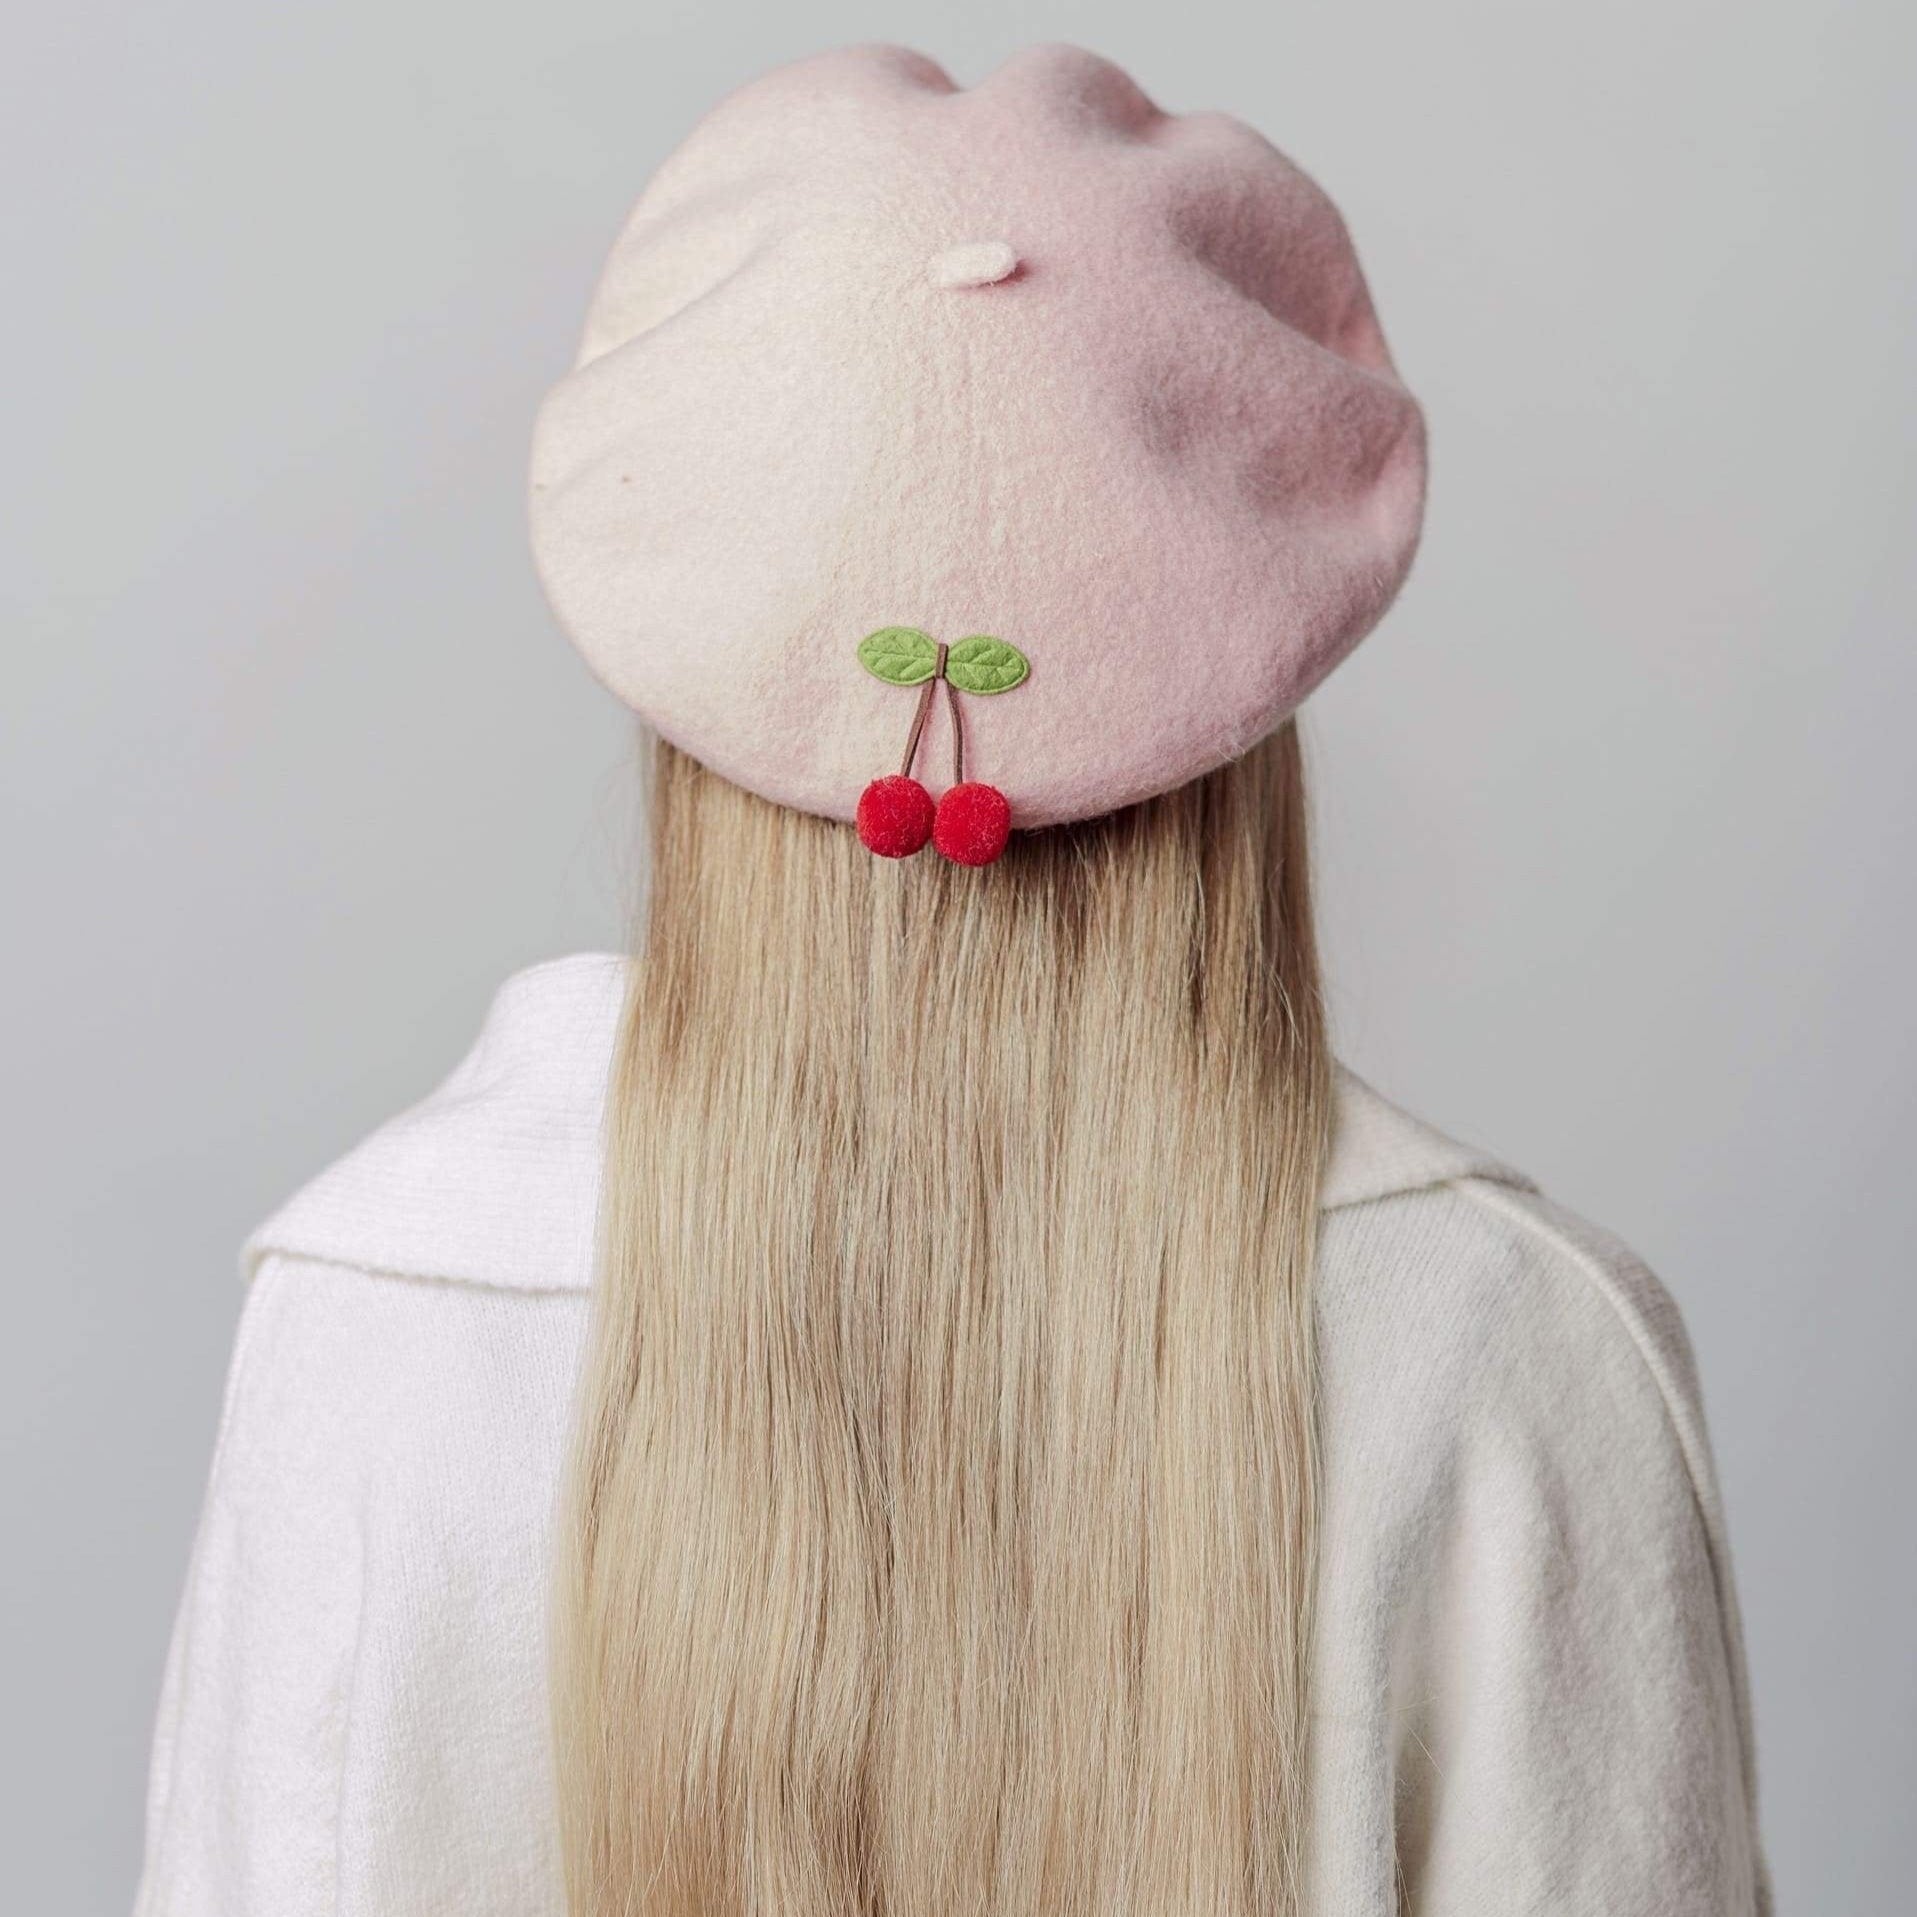 Cherry Wool Beret Hat for Women and Kids.